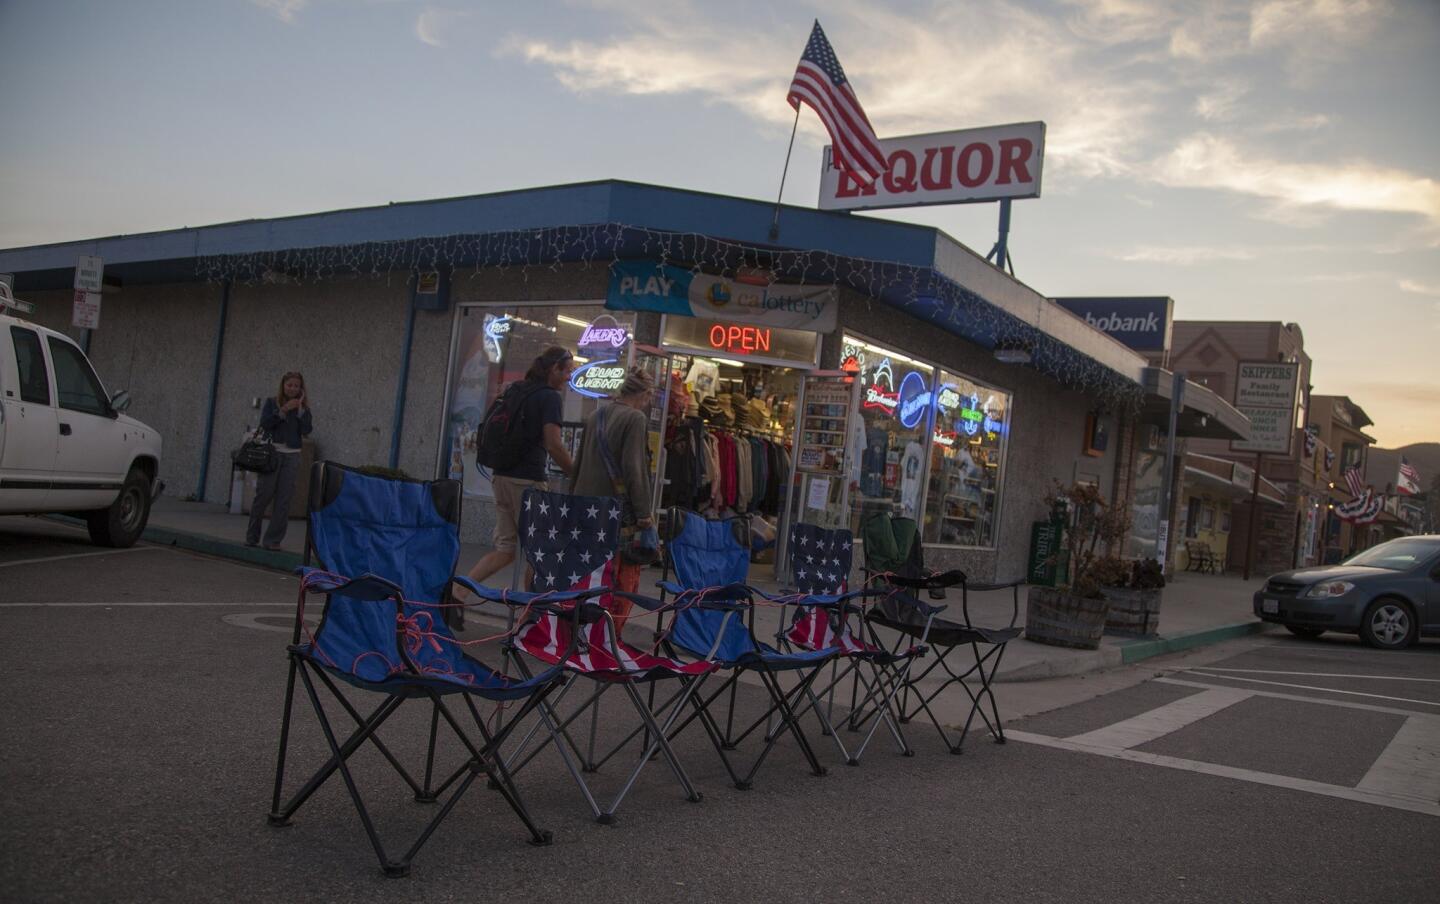 Many days before the Fourth of July celebration in Cayucos, locals and visitors reserve their parade-viewing spots along Ocean Avenue. The Cayucos Chamber of Commerce says 30,000 visitors will descend on the Central Coast community for the Independence Day parade, sand castle contest and fireworks.